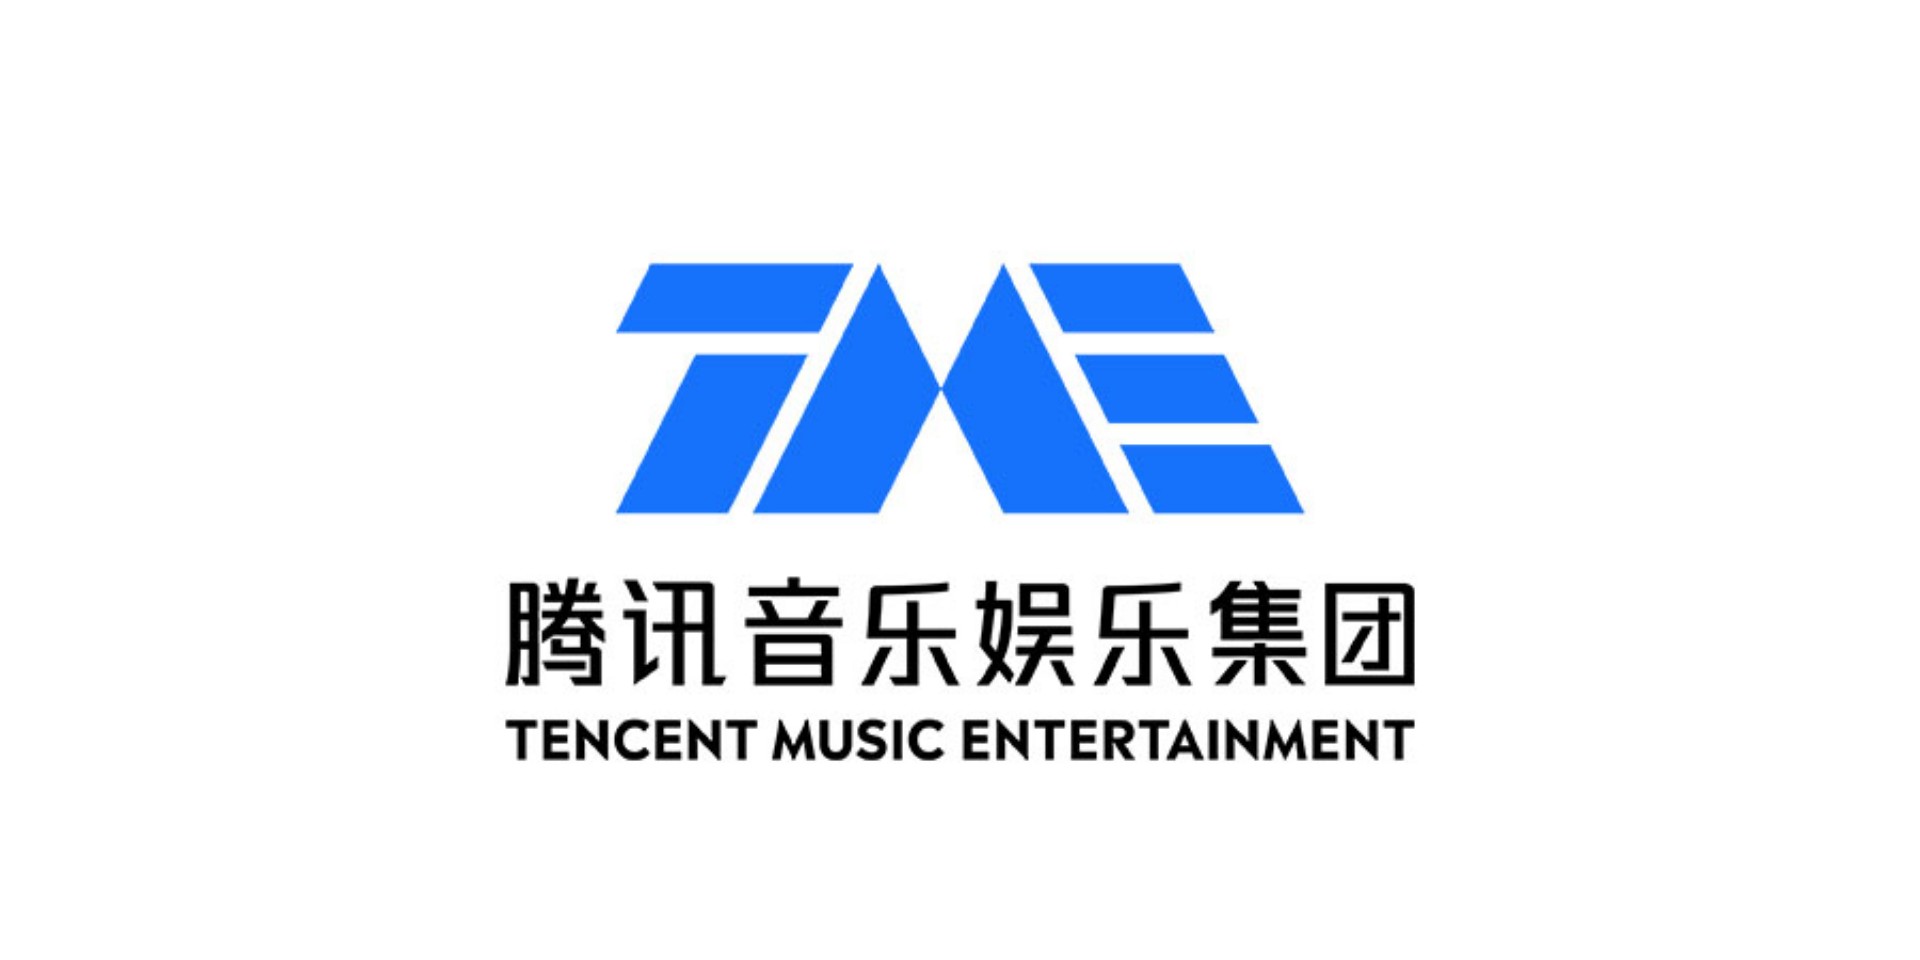 Tencent Music Entertainment records 5.3 million new online music paying users